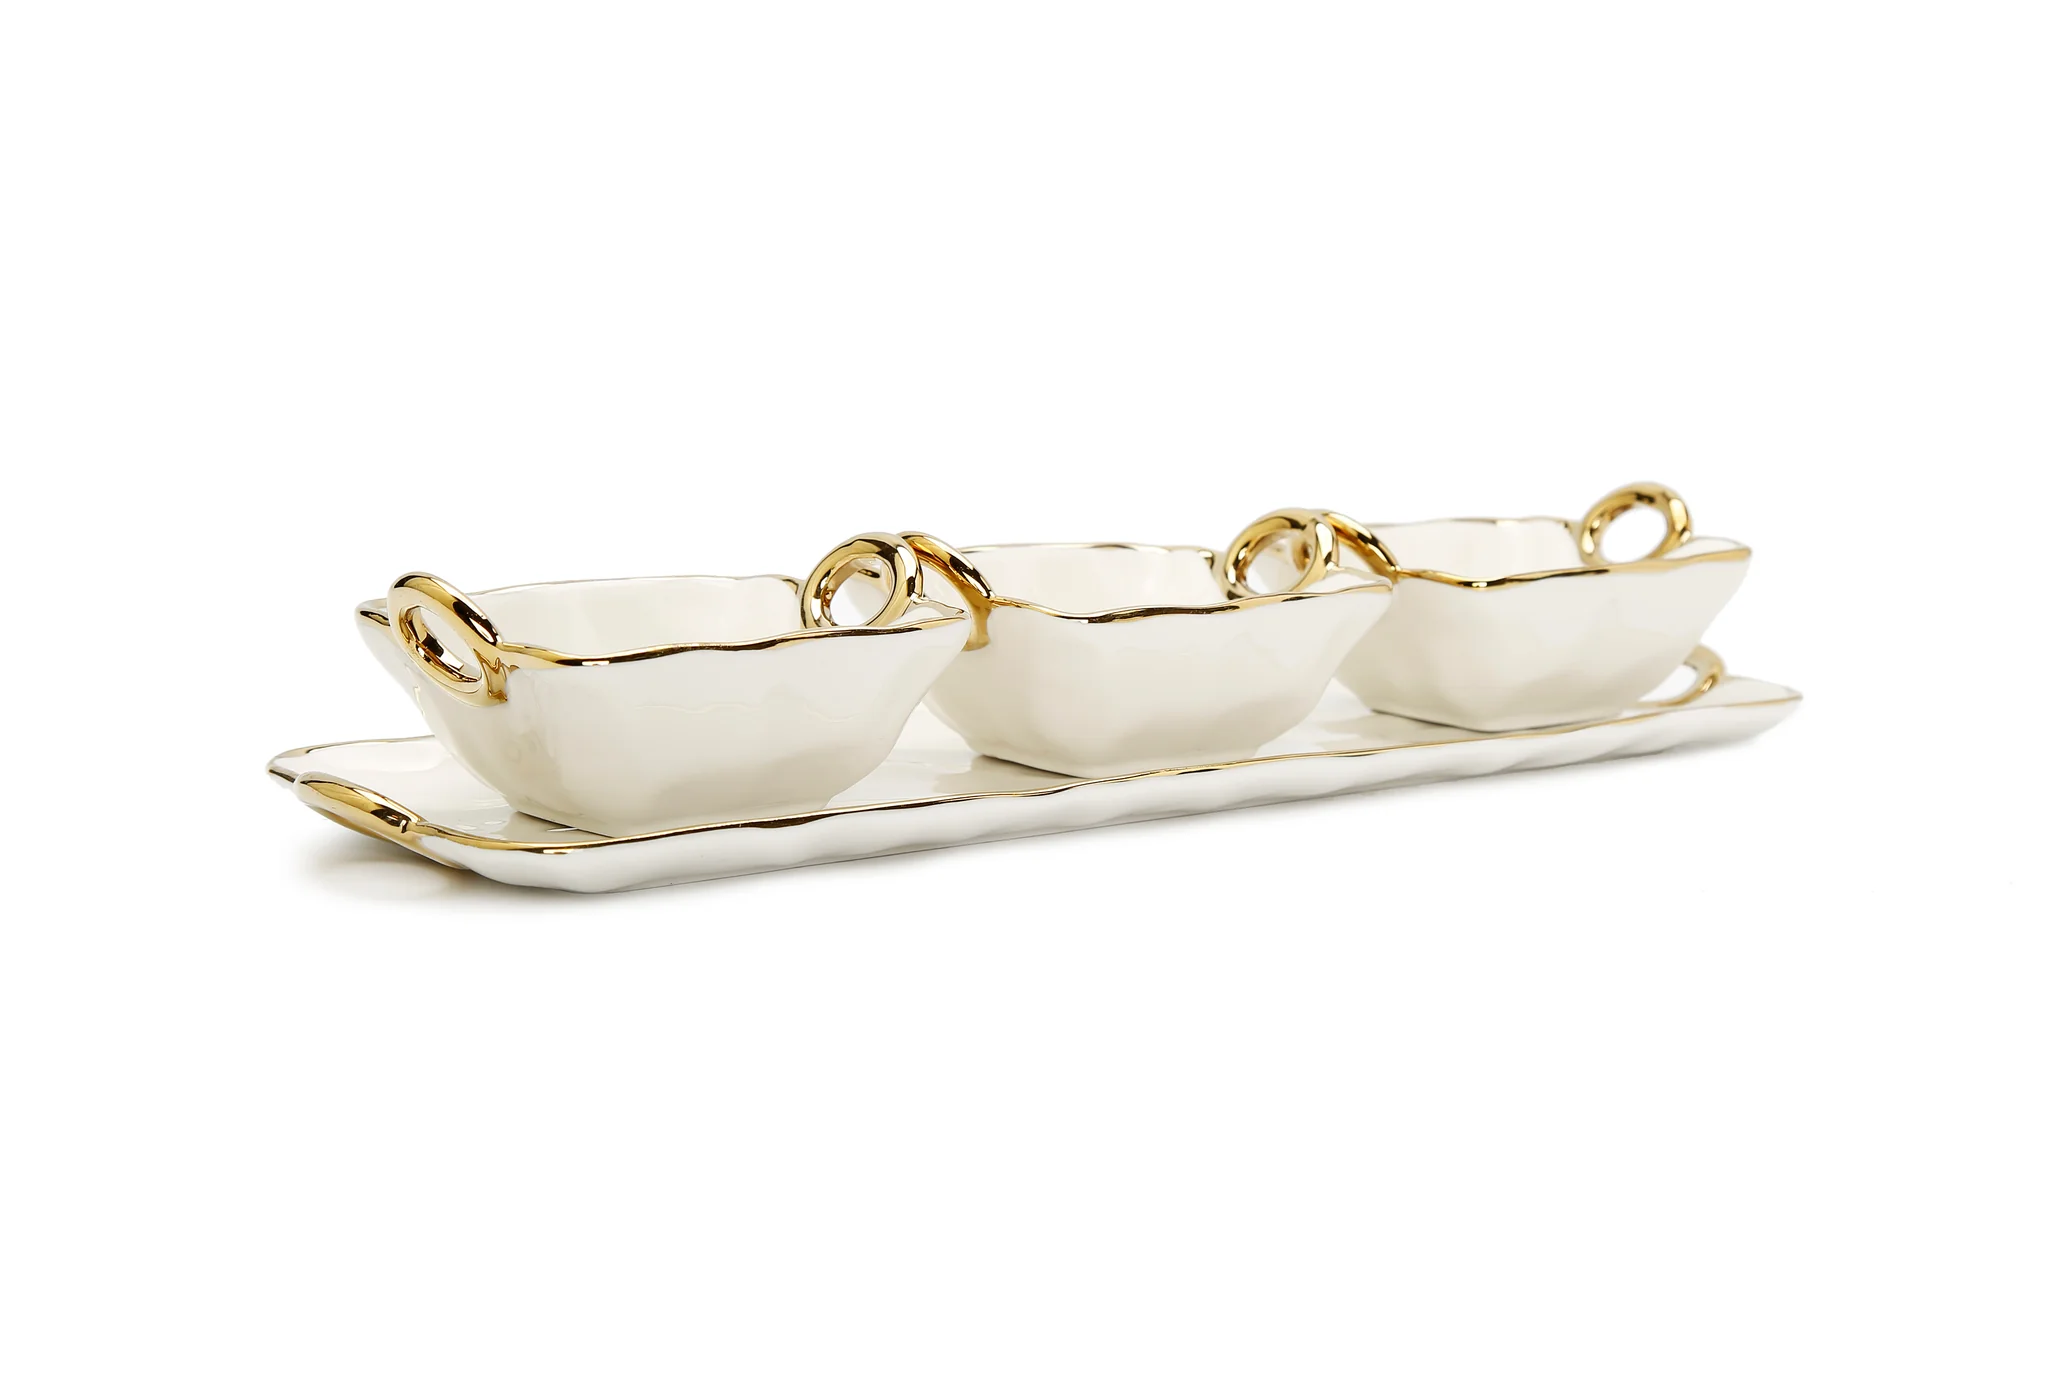 White Porcelain Relish Dish with 3 bowls